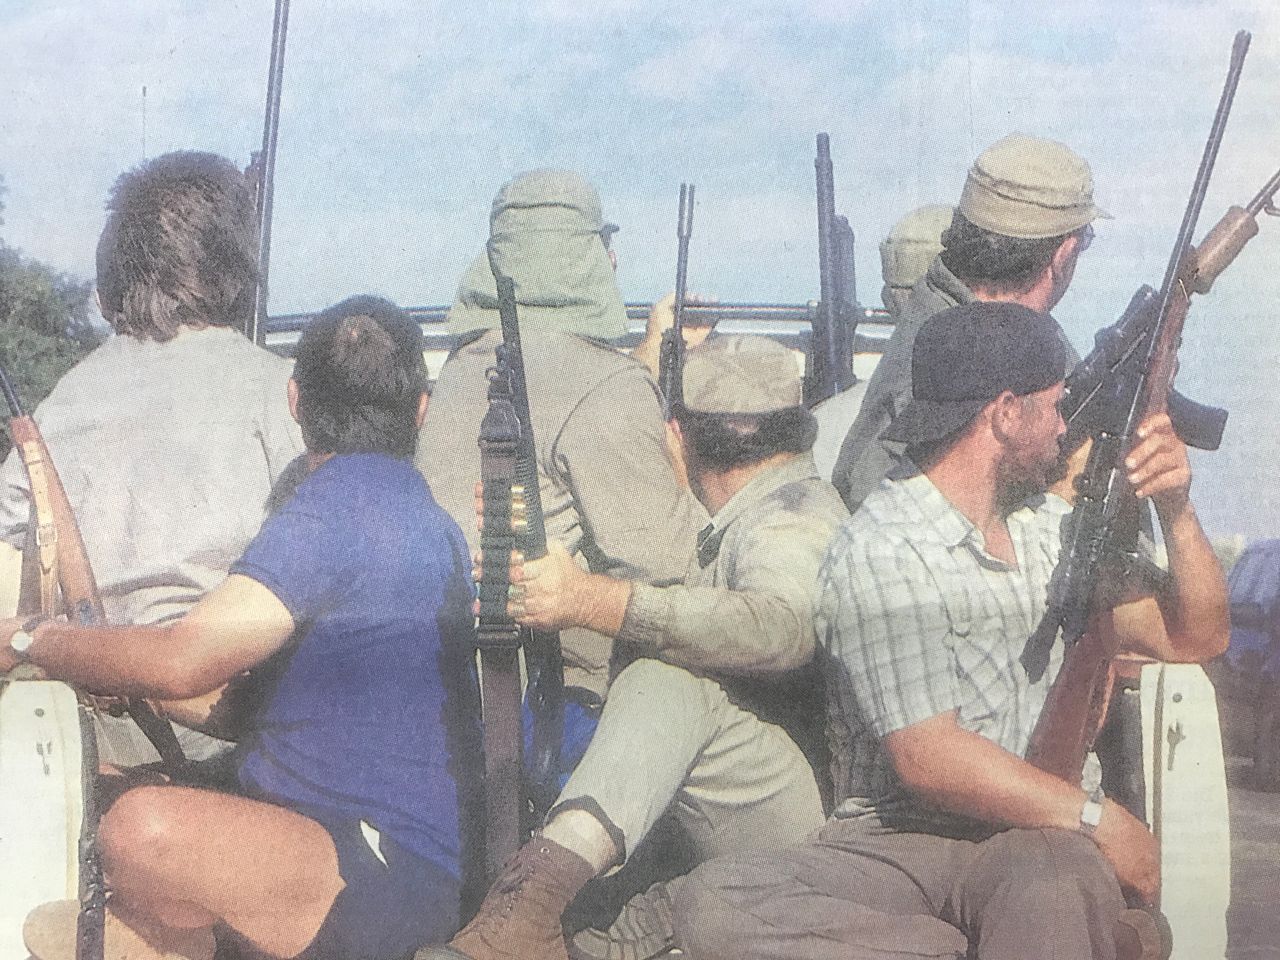 Armed members of the AWB in Bophuthatswana during the violence that led to the end of Lucas Mangope's regime.